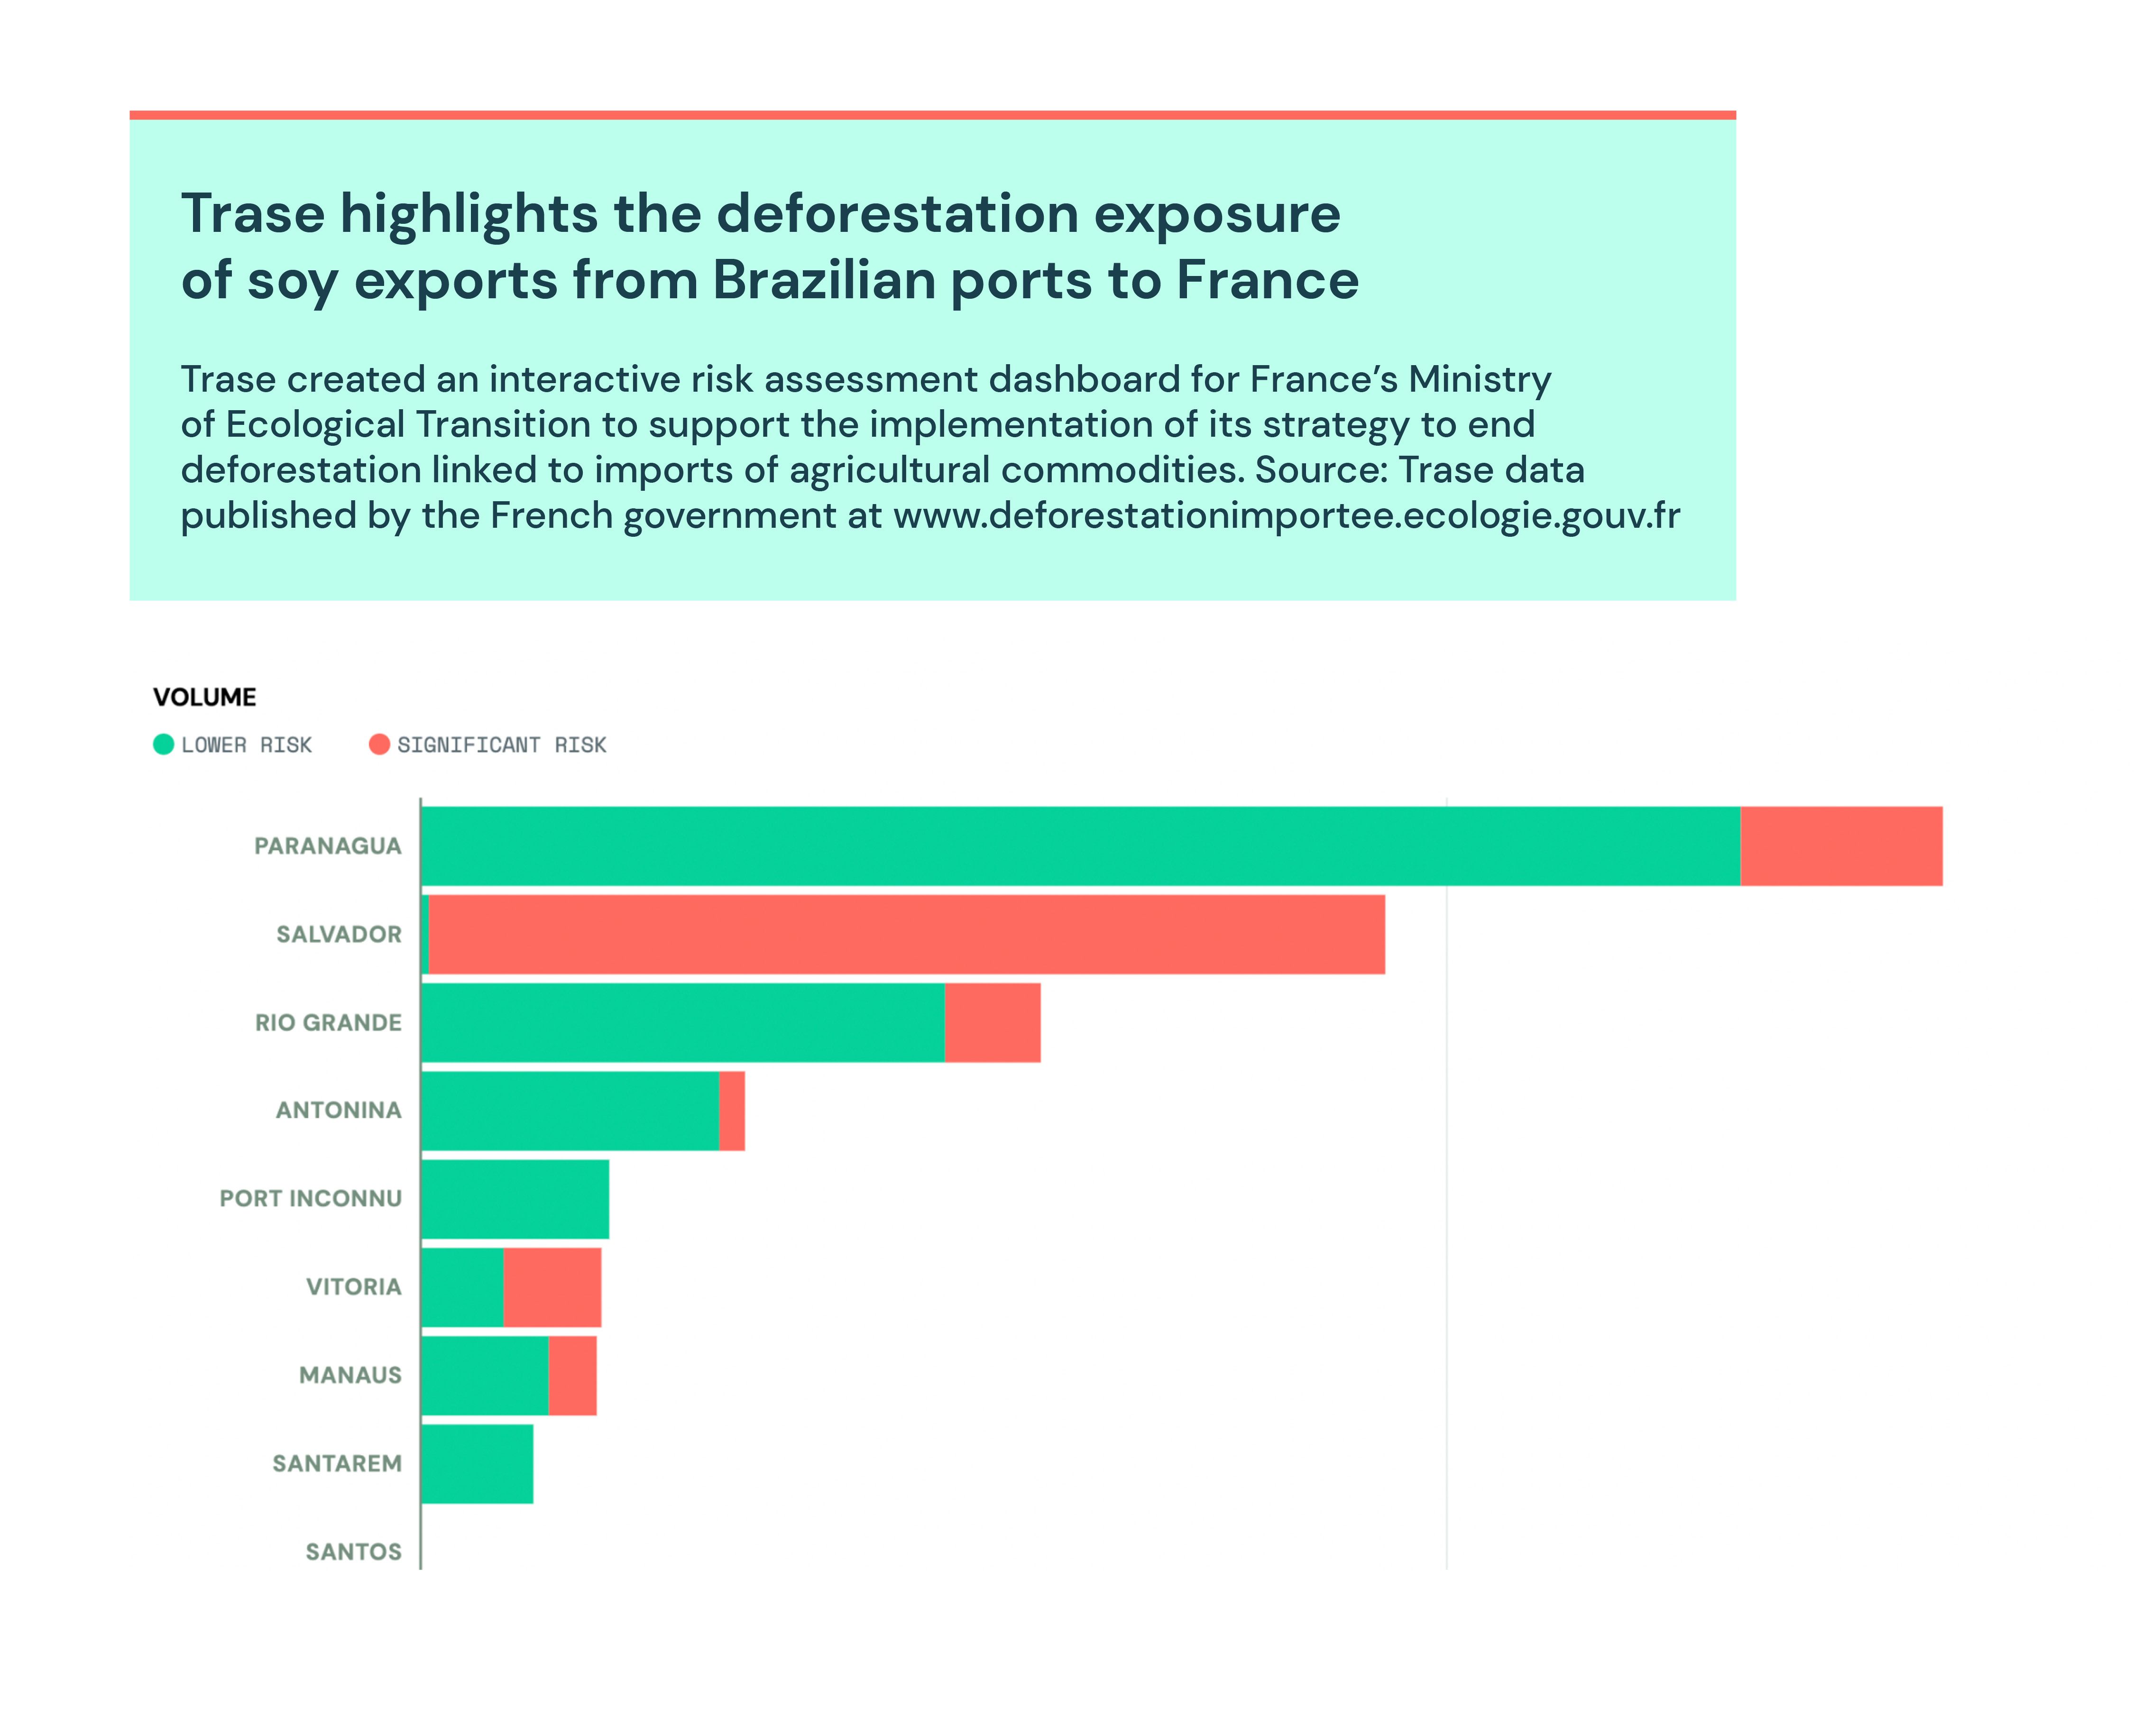 Trase highlights the deforestation exposure of soy exports from Brazilian ports to France